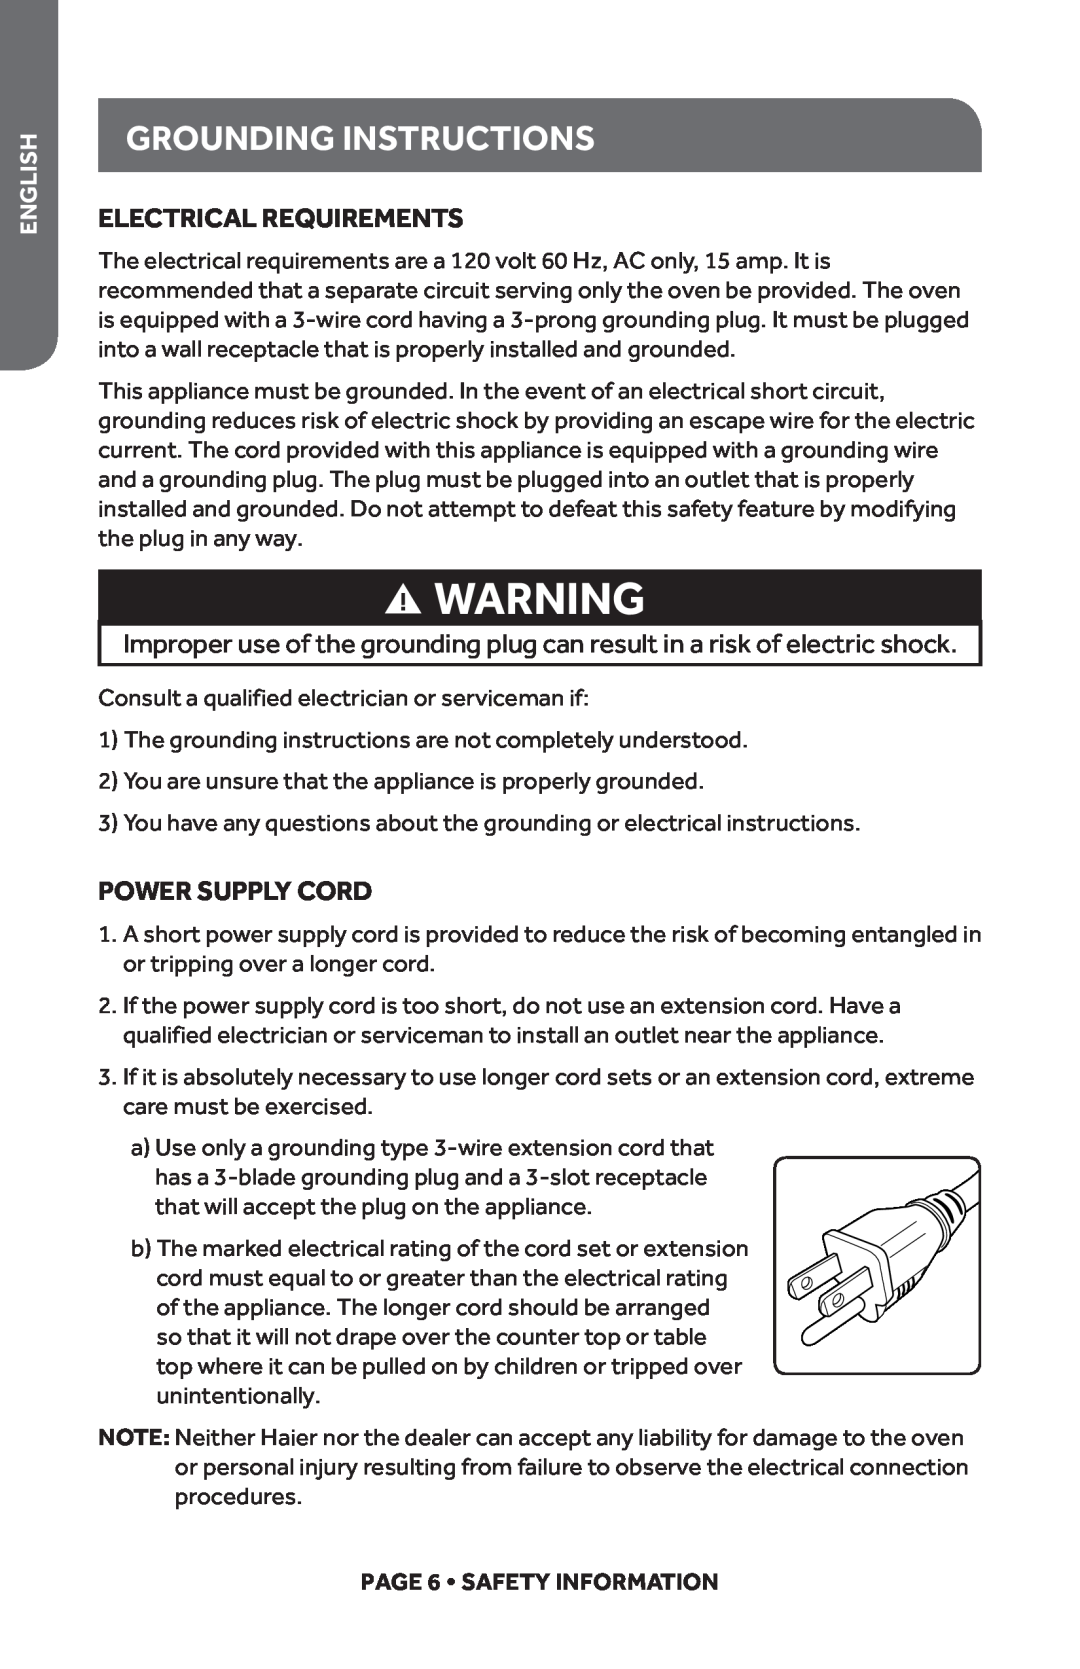 Haier HMC1035SESS Grounding Instructions, Electrical Requirements, Power Supply Cord, English, PAGE 6 SAFETY INFORMATION 